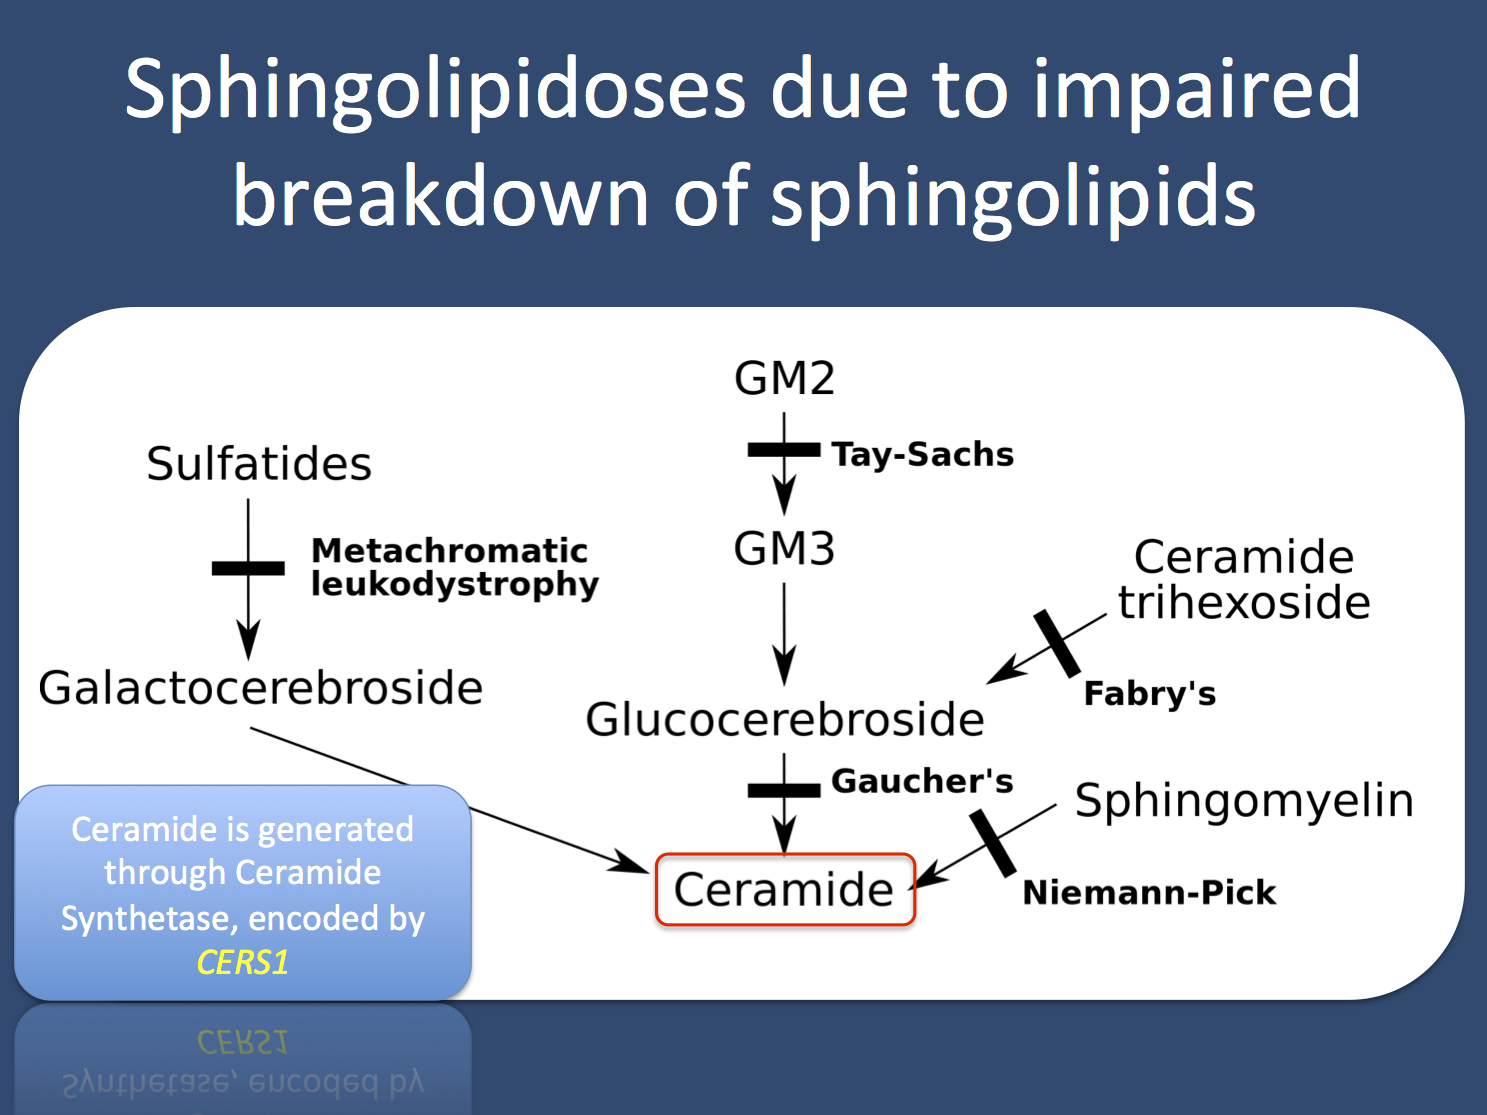 An overview of the defects in various sphingolipidoses. This group of disorders is due to defects in the breakdown of sphingolipids, which include sphingomyelin, cerebrosides and gangliosides (adapted under a Creative Commons license from http://en.wikipedia.org/wiki/File:Inborn_errors_of_metabolism.svg)